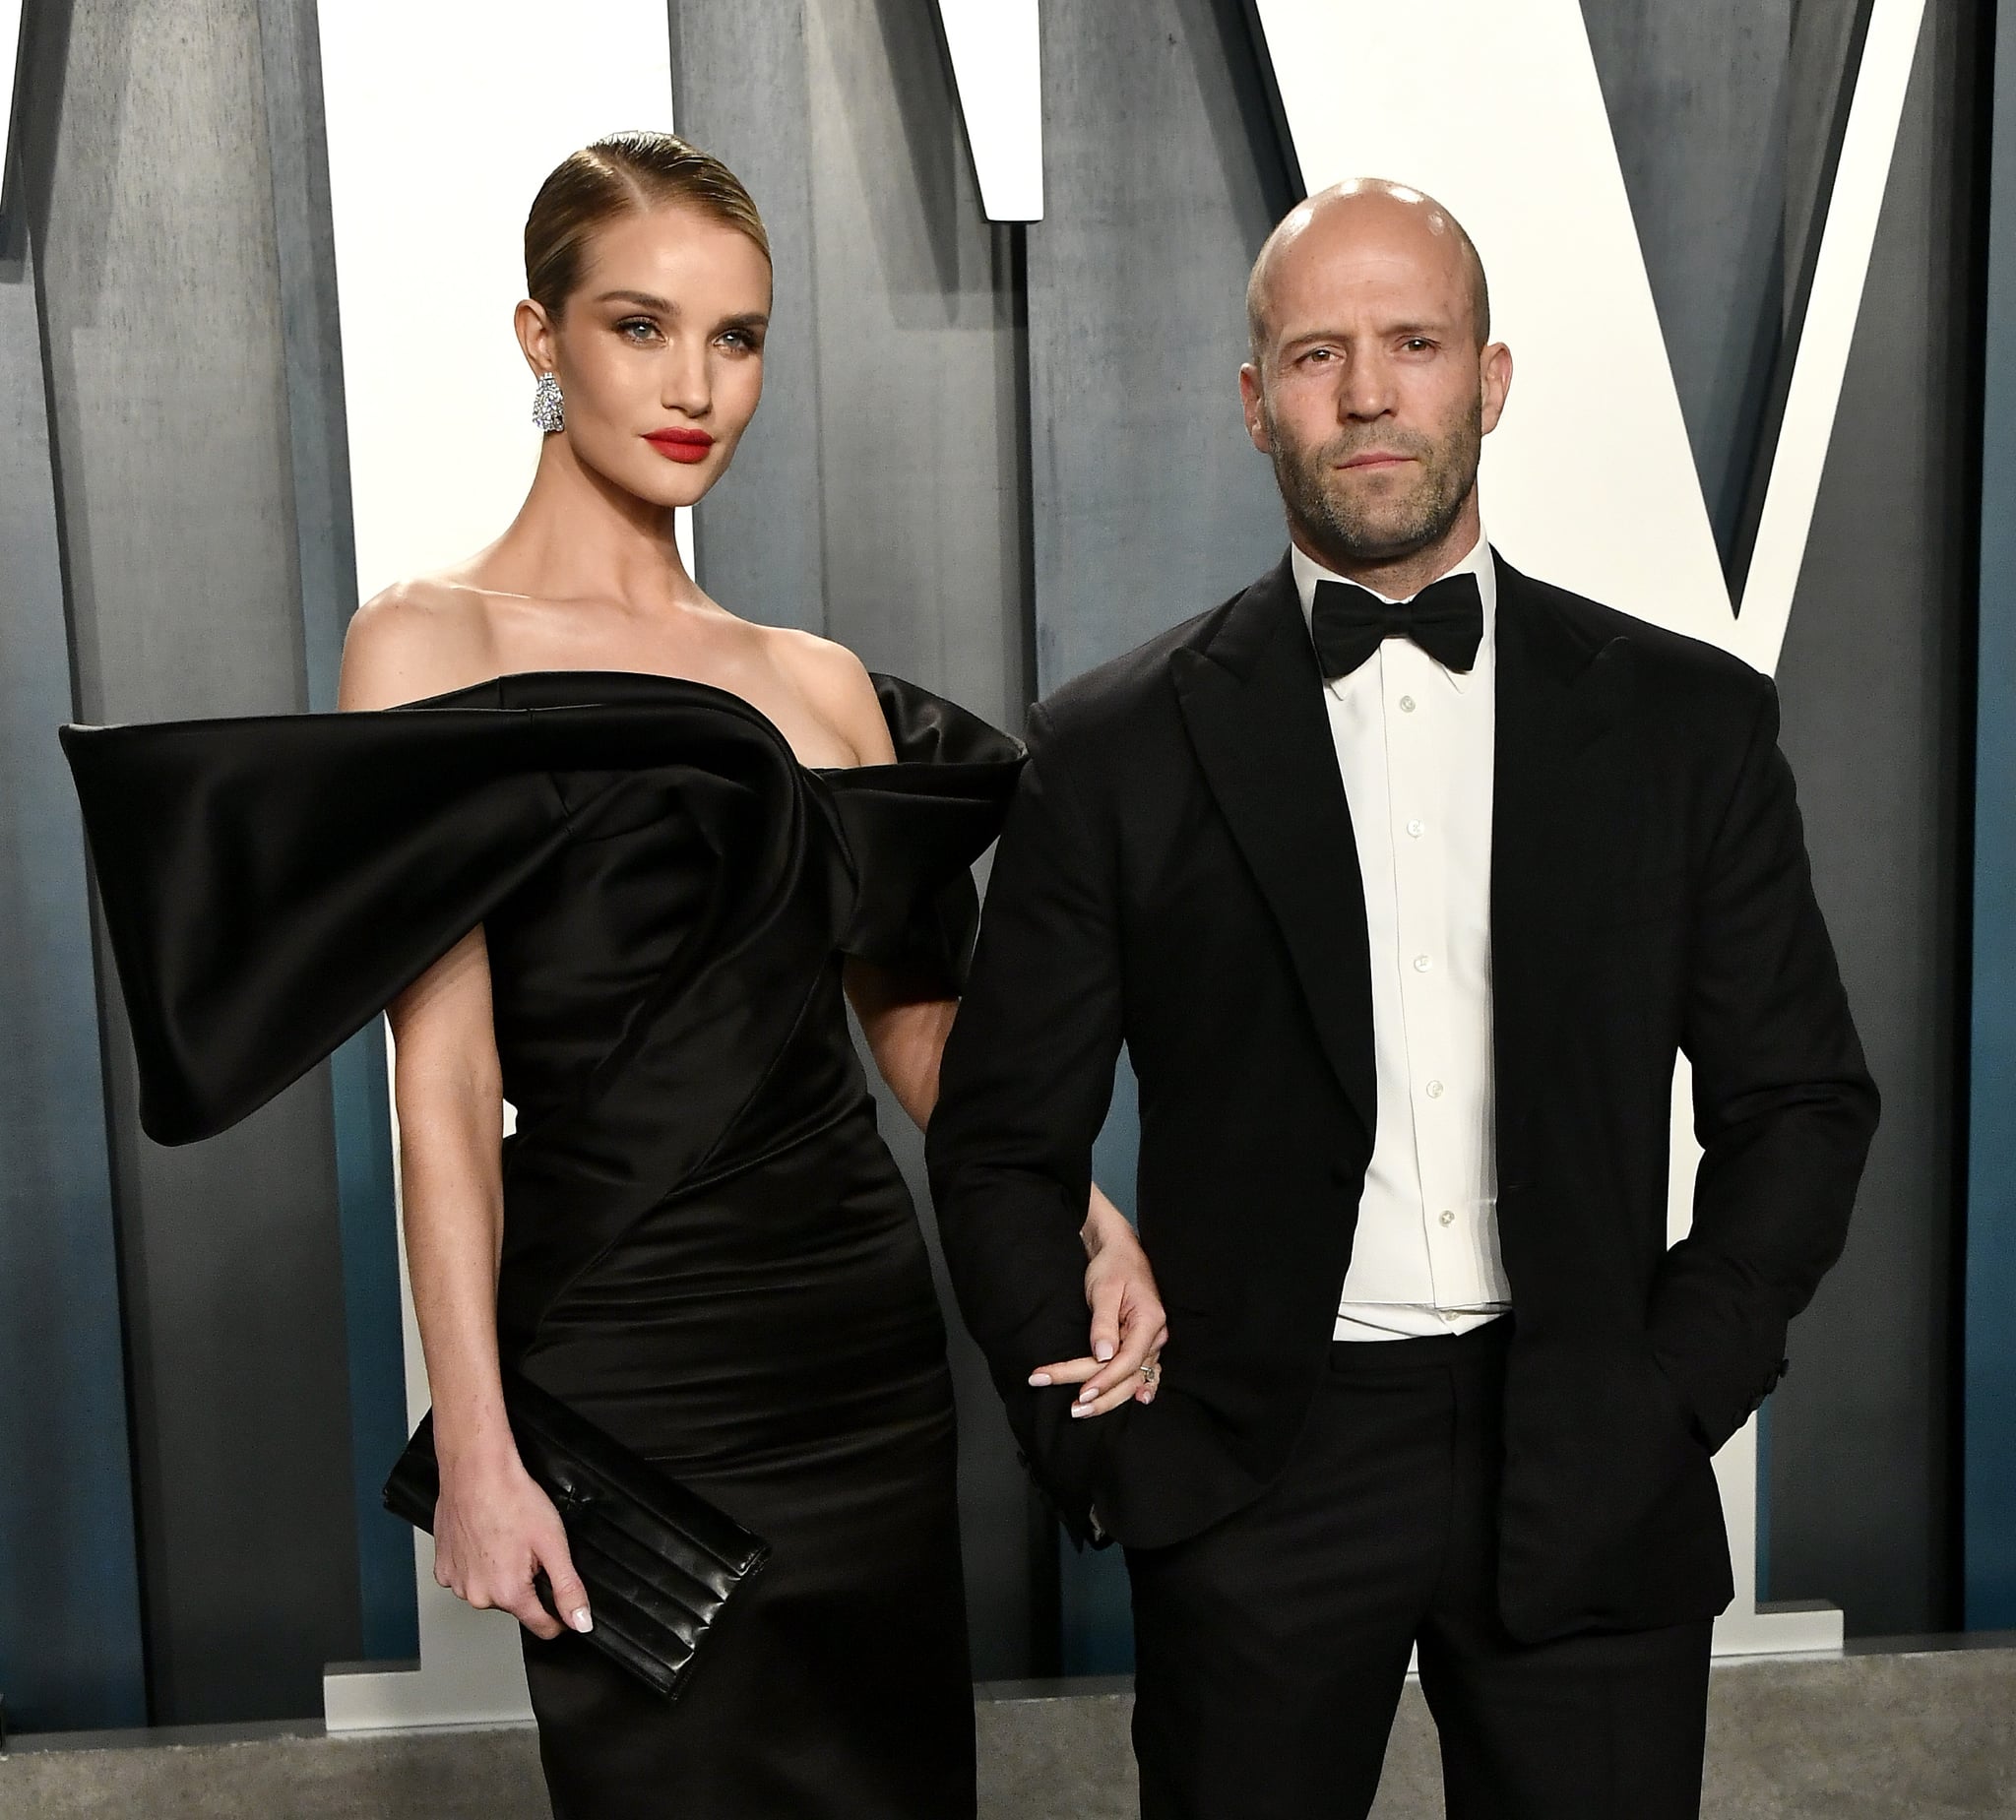 BEVERLY HILLS, CALIFORNIA - FEBRUARY 09: Rosie Huntington-Whiteley and Jason Statham attend the 2020 Vanity Fair Oscar Party hosted by Radhika Jones at Wallis Annenberg Center for the Performing Arts on February 09, 2020 in Beverly Hills, California. (Photo by Frazer Harrison/Getty Images)